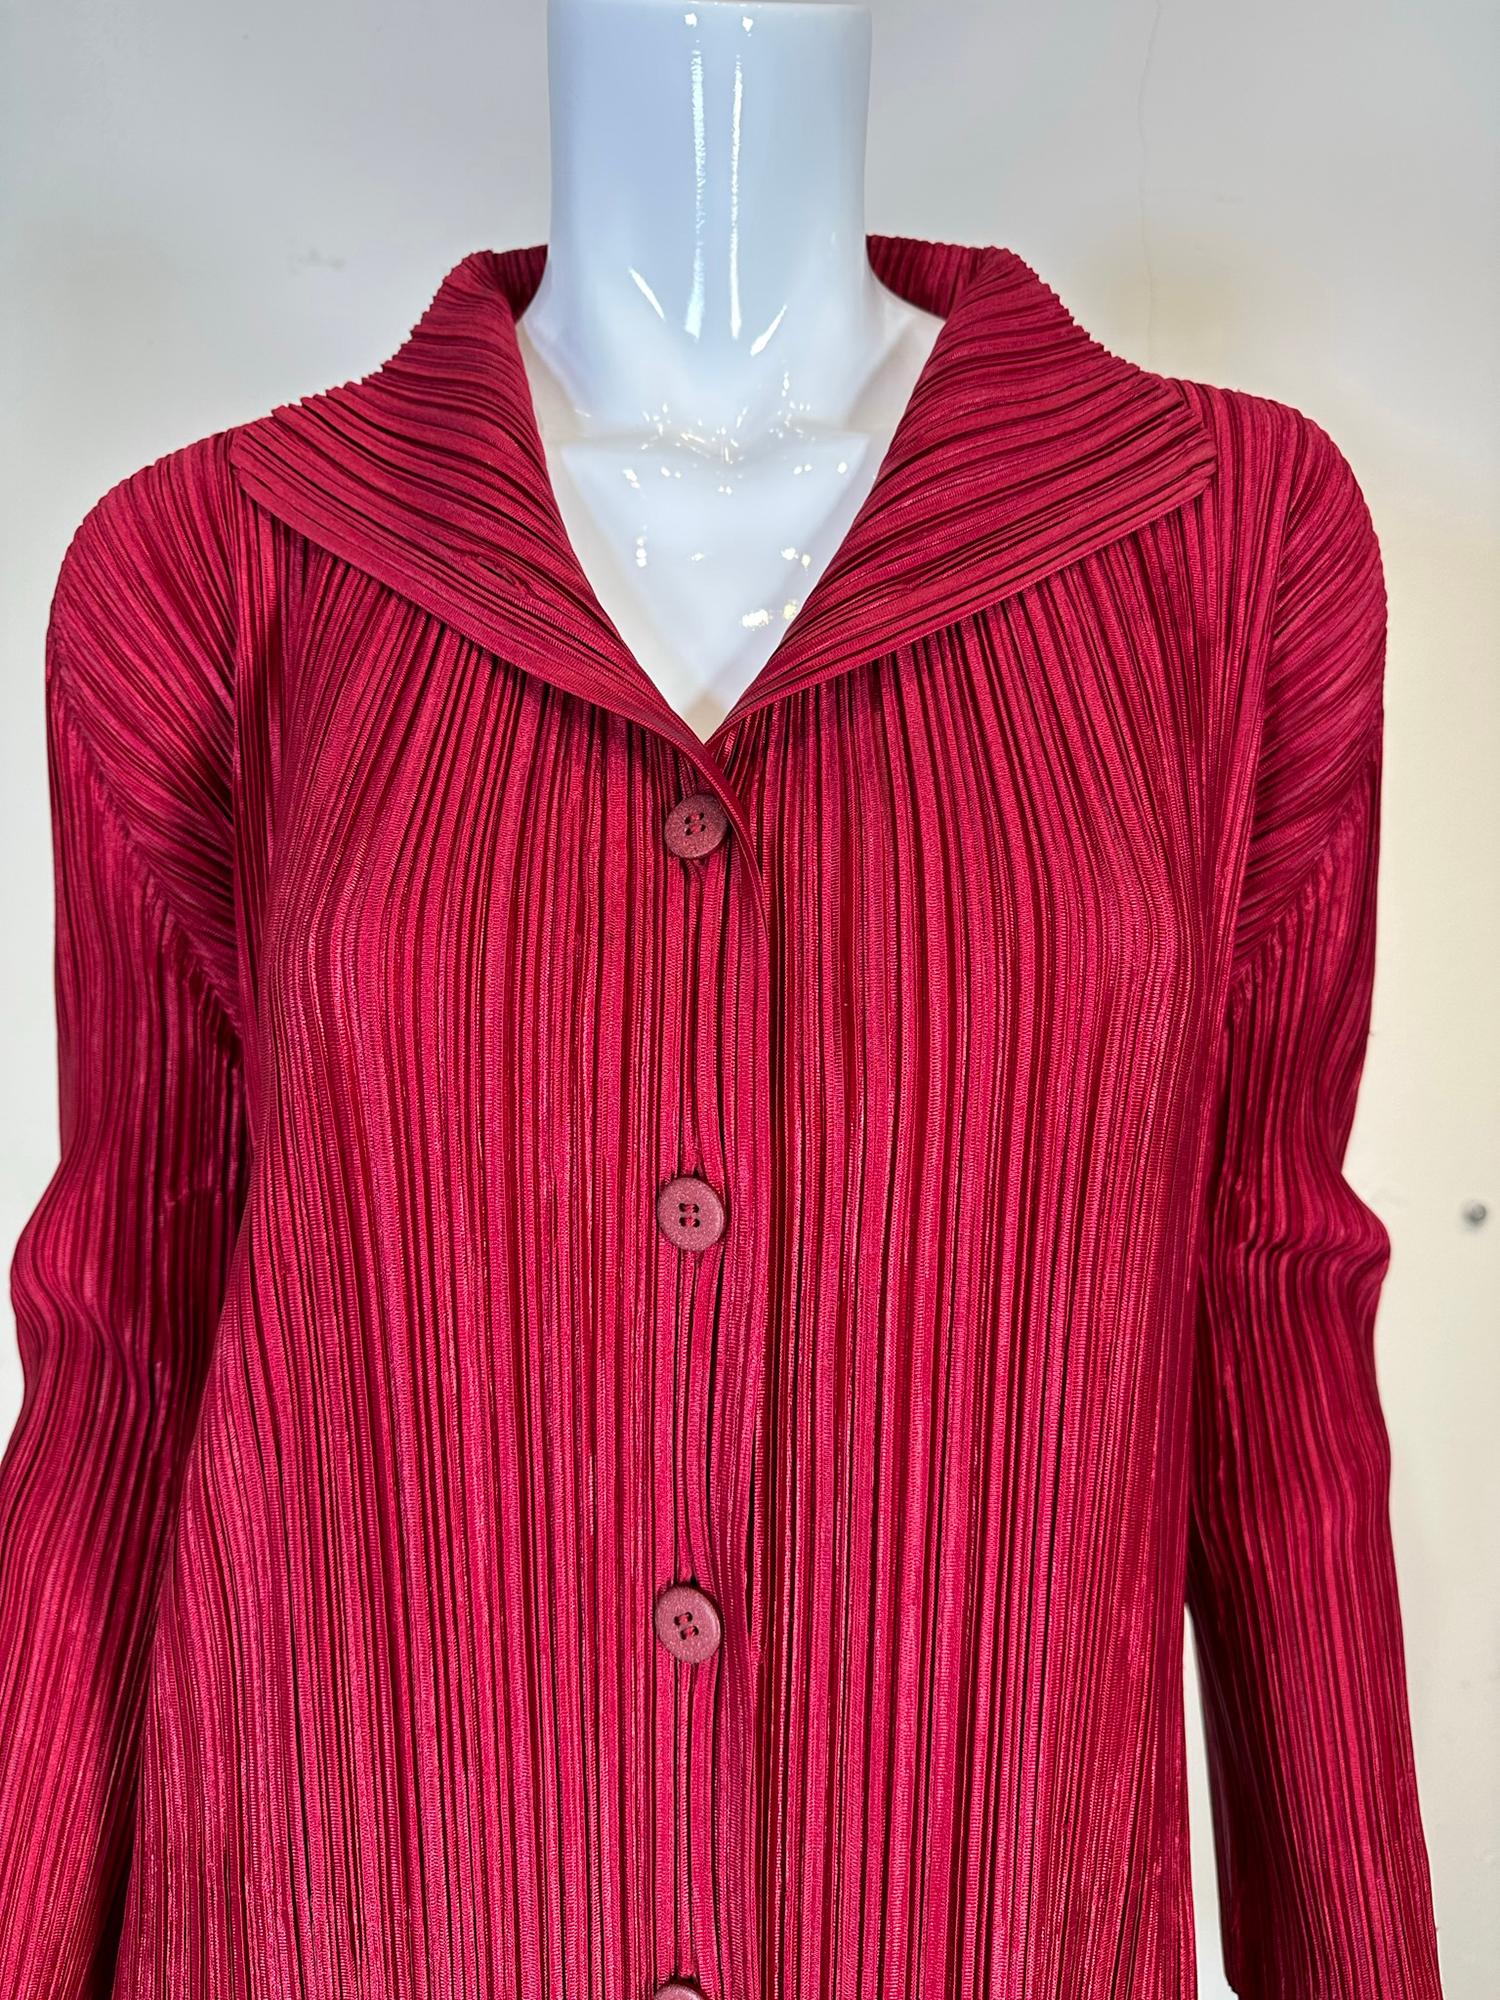 Pleats Please Issey Miyake
burgundy single breasted turn back lapel collar coat, marked size 3 S-M. Button front light weight pleated coat. Single lapels turn back to form a collar. Approximately knee length, see measurements below. Unlined. 
In